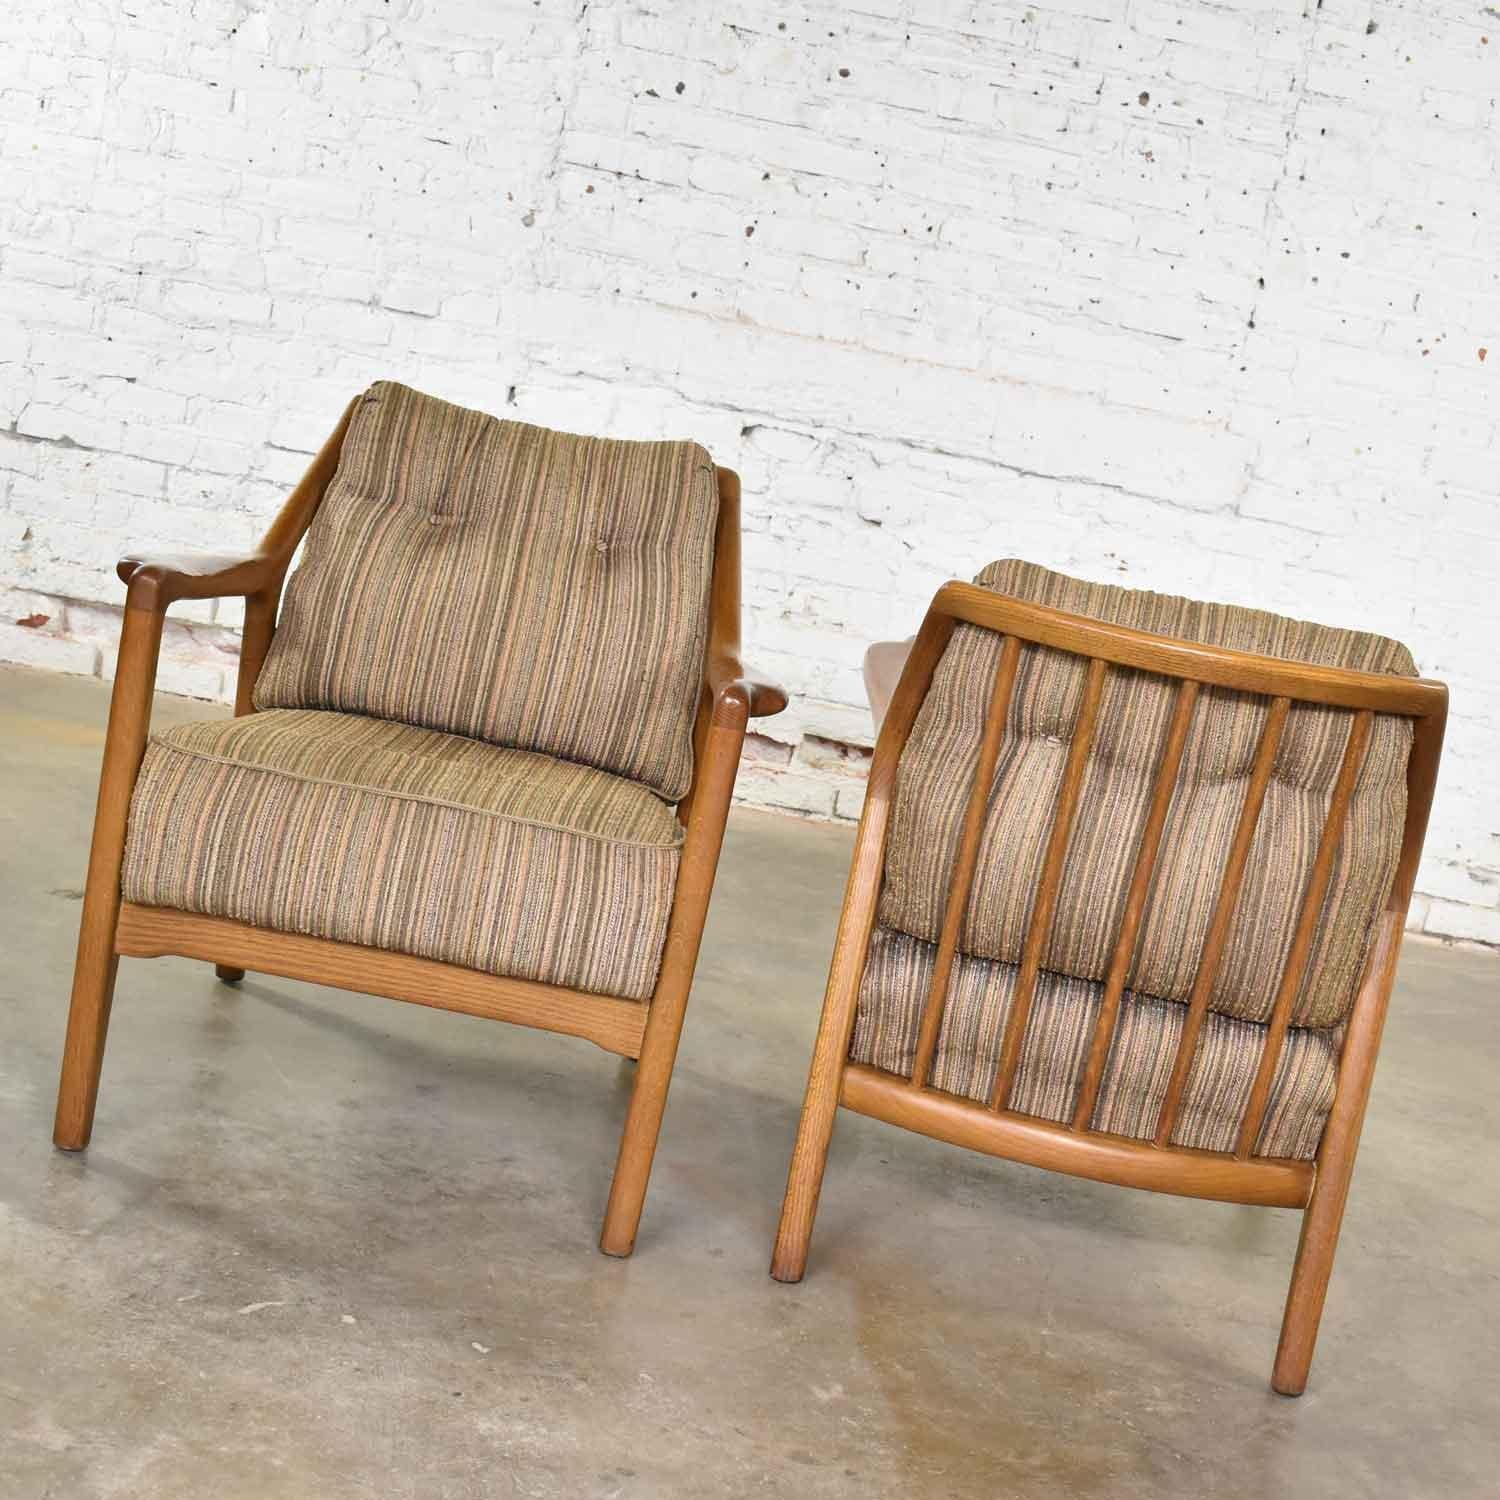 Mid-Century Modern Pair of Ash Group Spindle Back Chairs by Jack Van der Molen for Jamestown Lounge